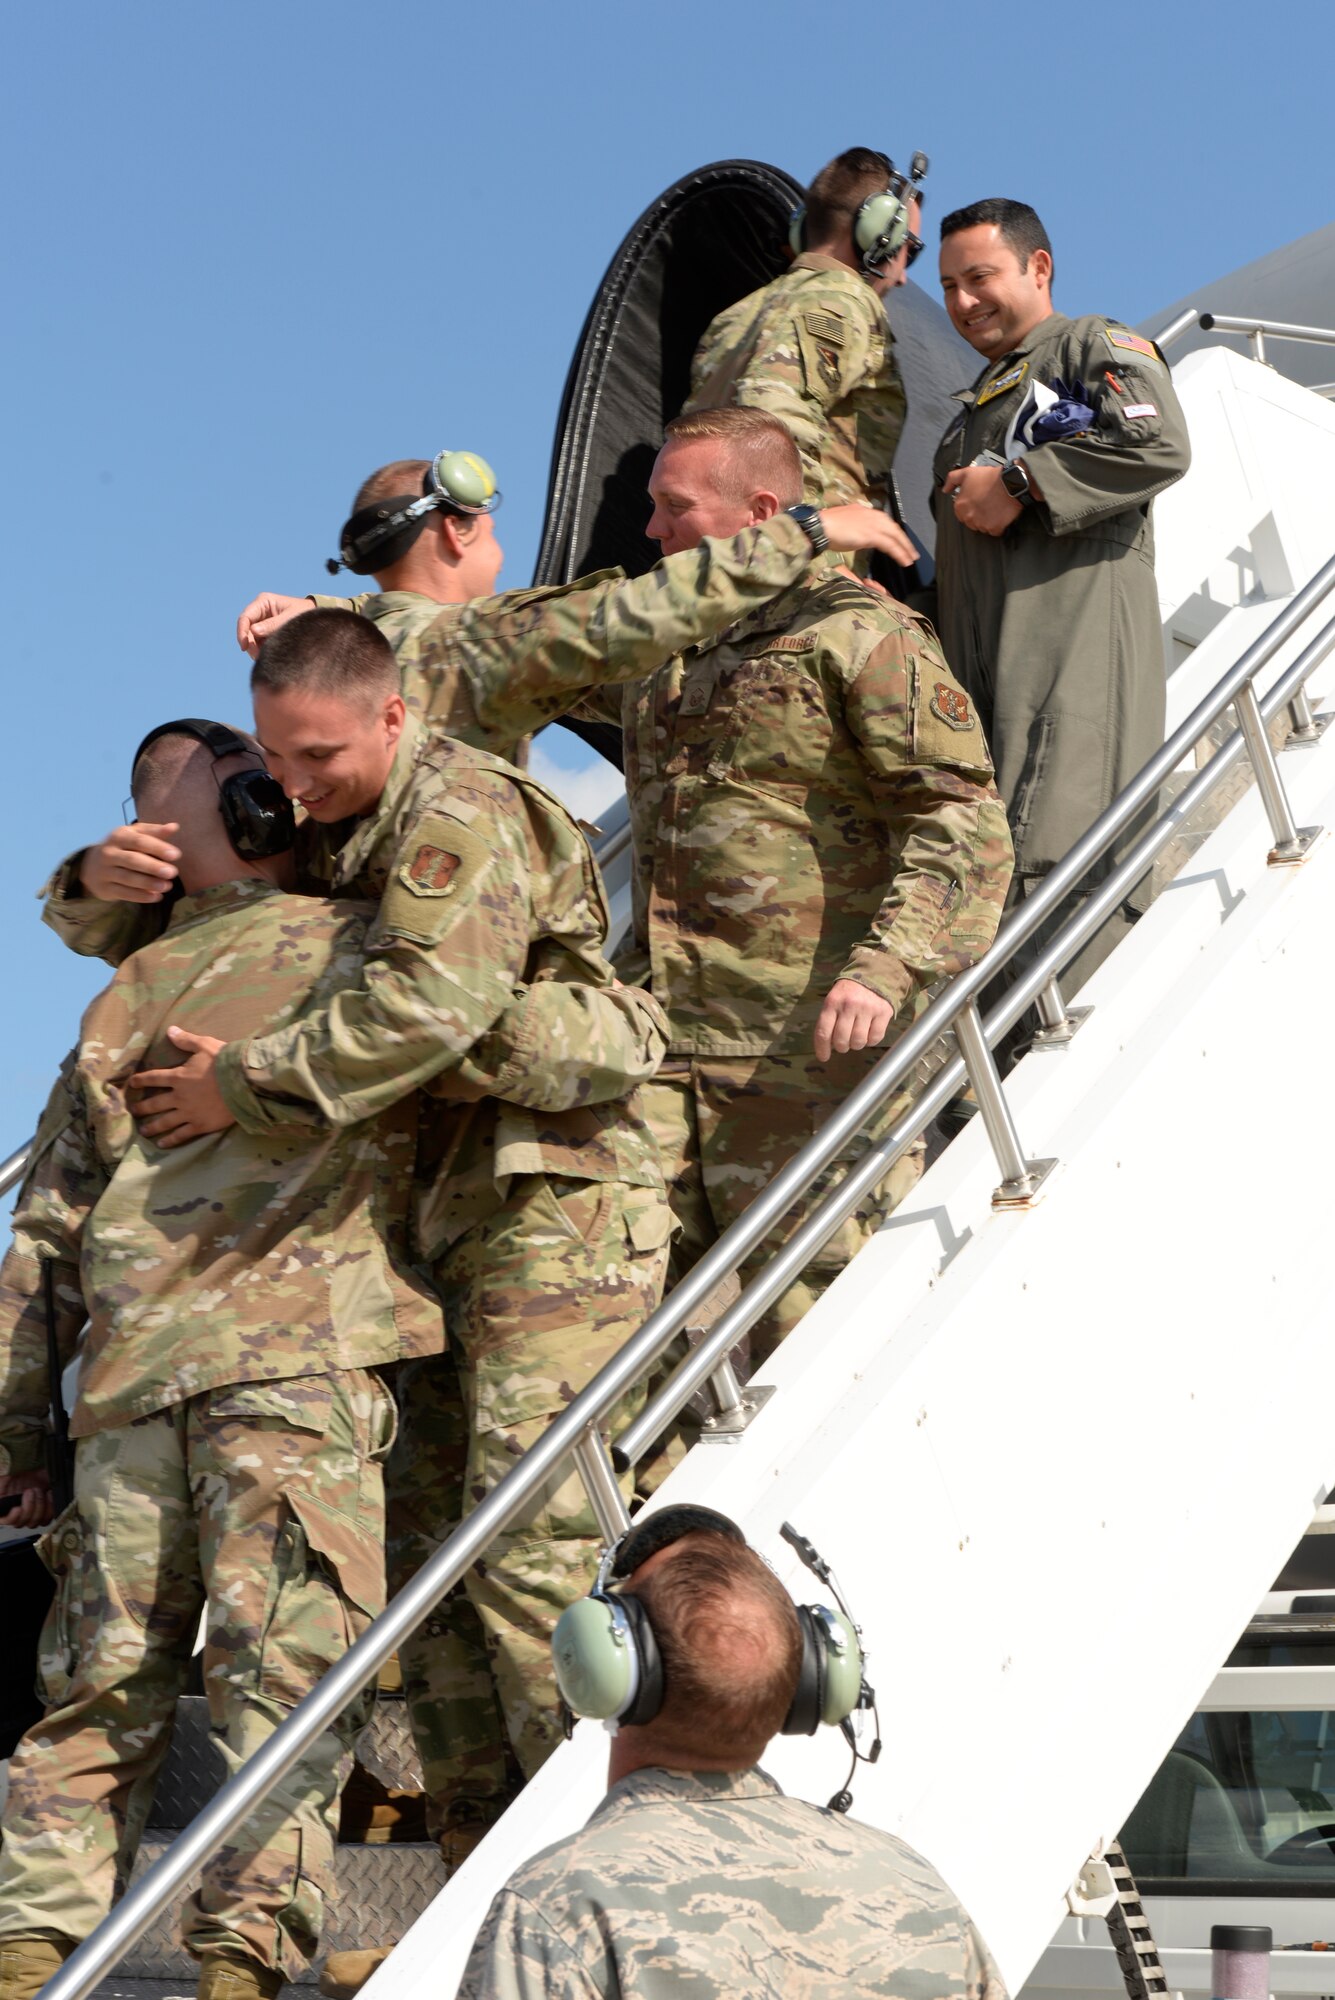 Members from the 157th Maintenance Group celebrate the landing of the first KC-46A Pegasus at Pease Air National Guard Base Aug. 8, 2019. The Pegasus forges a new era at Pease, marking the first upgrade to its aircraft inventory in decades. (U.S. Air National Guard photo by Senior Airman Victoria Nelson)